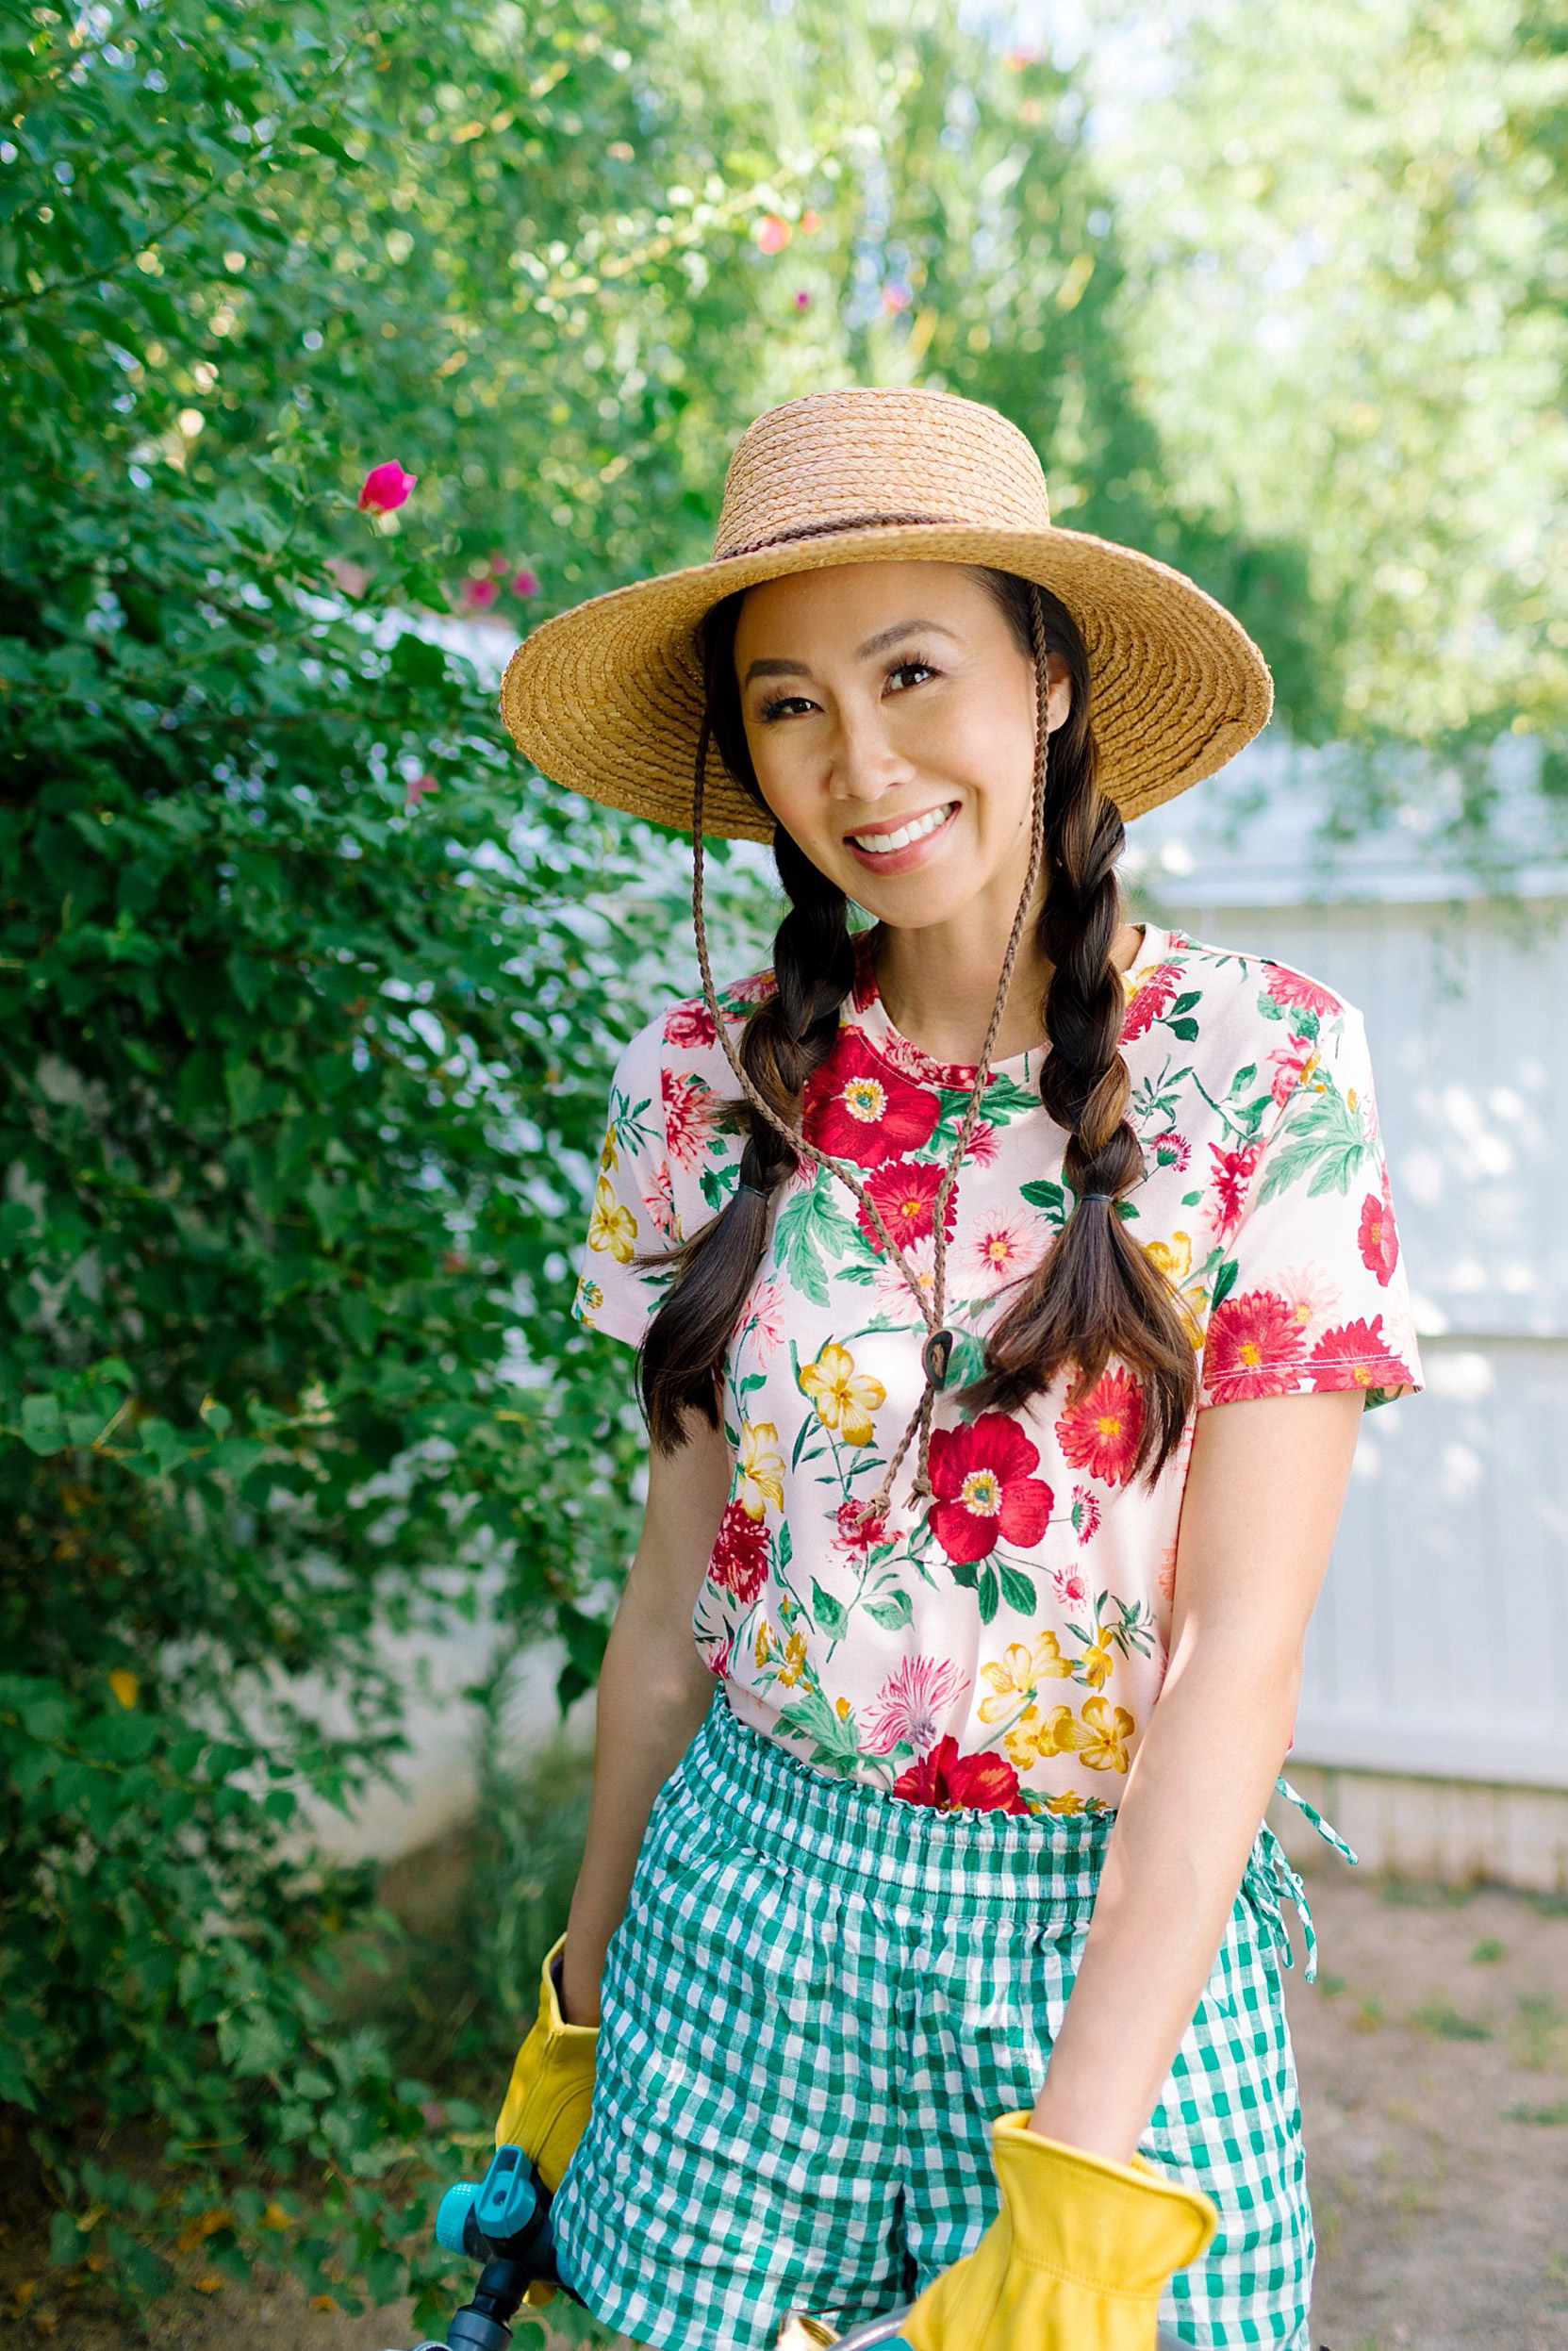 fAQ about starting a garden Garden preparation with Fiskars and Gilmour flexogen hose with tool shed tour garden lifestyle blogger Diana Elizabeth phoenix arizona wearing floral shirt and gingham shorts